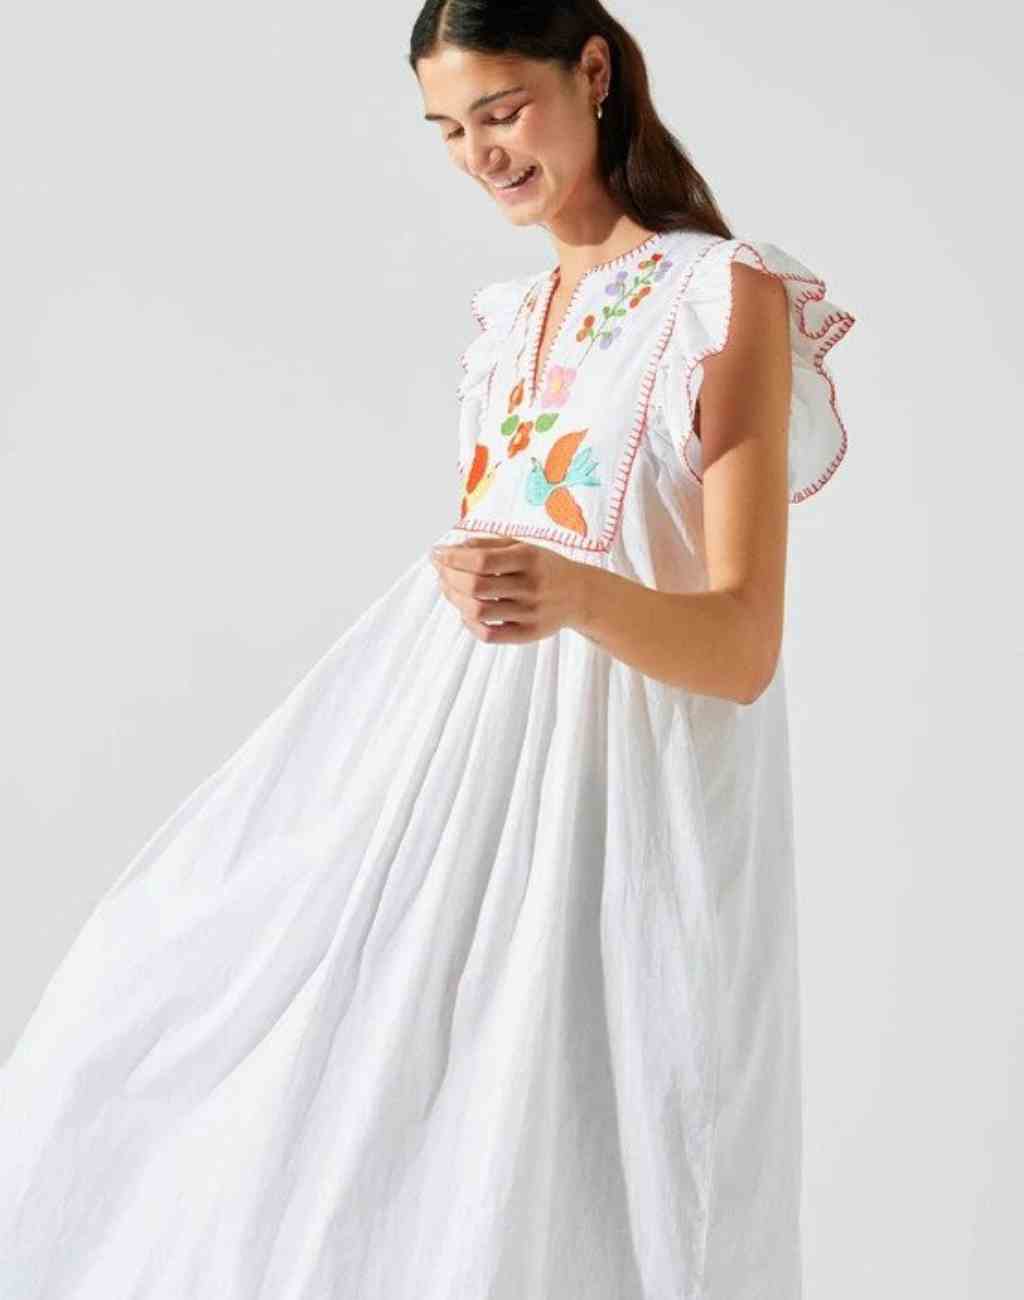 White Midi/Maxi Dress with Whimsical Embroidery and Flutter Sleeves